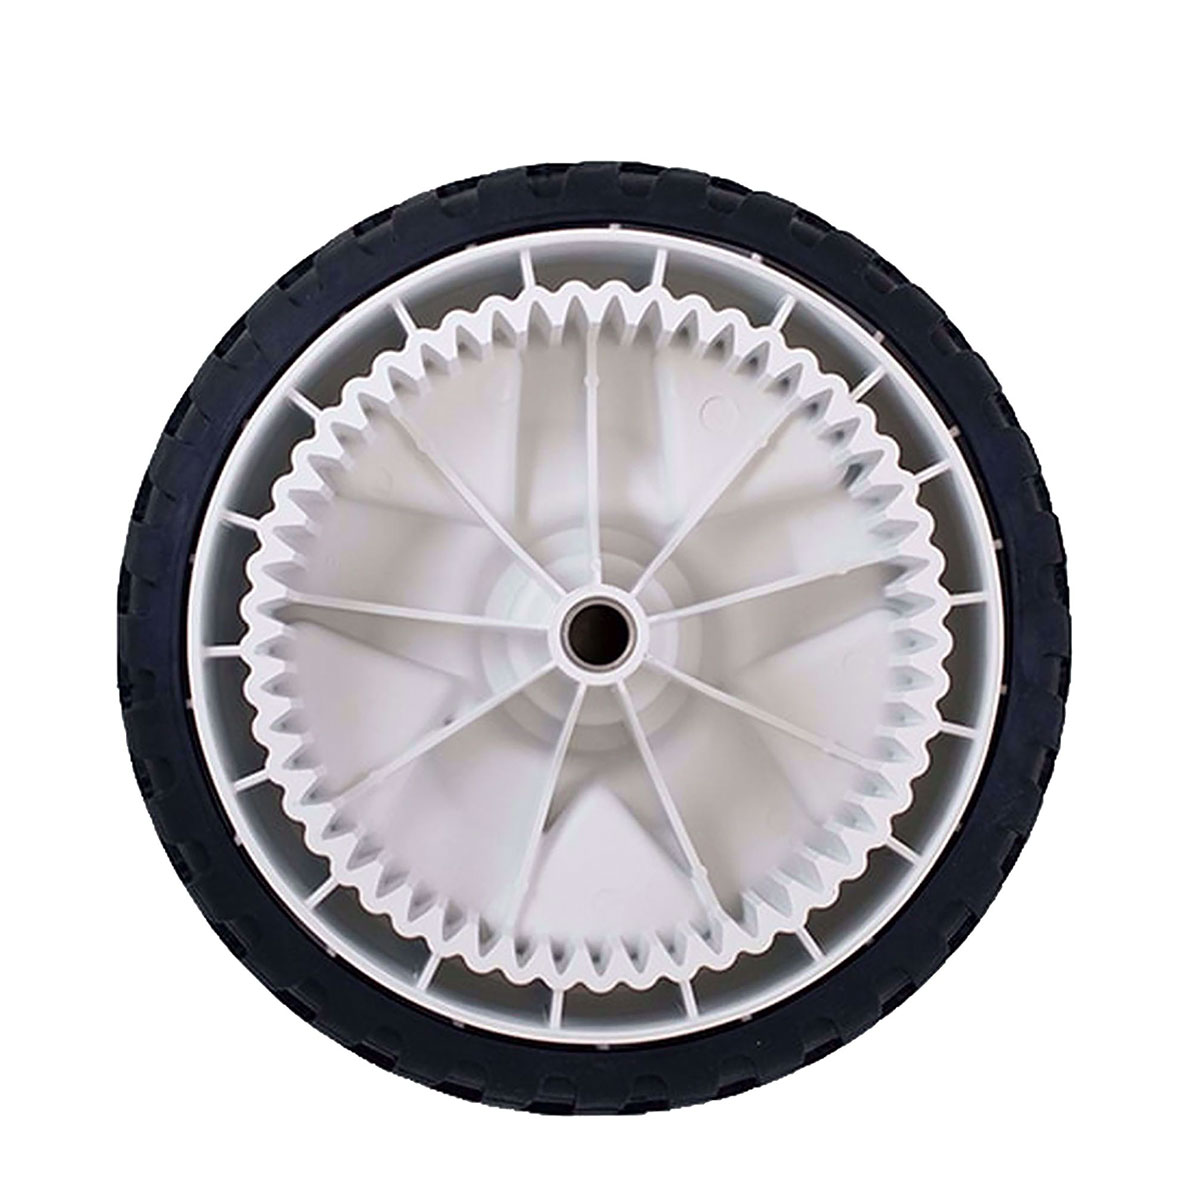 Genuine Toro 8" Front Wheel Assembly for Lawn Mowers fits 20339, 20377, 20378, 20379, 20959, 21378, 21761 / 115-2878, 119-0311, 137-4832 - image 2 of 3